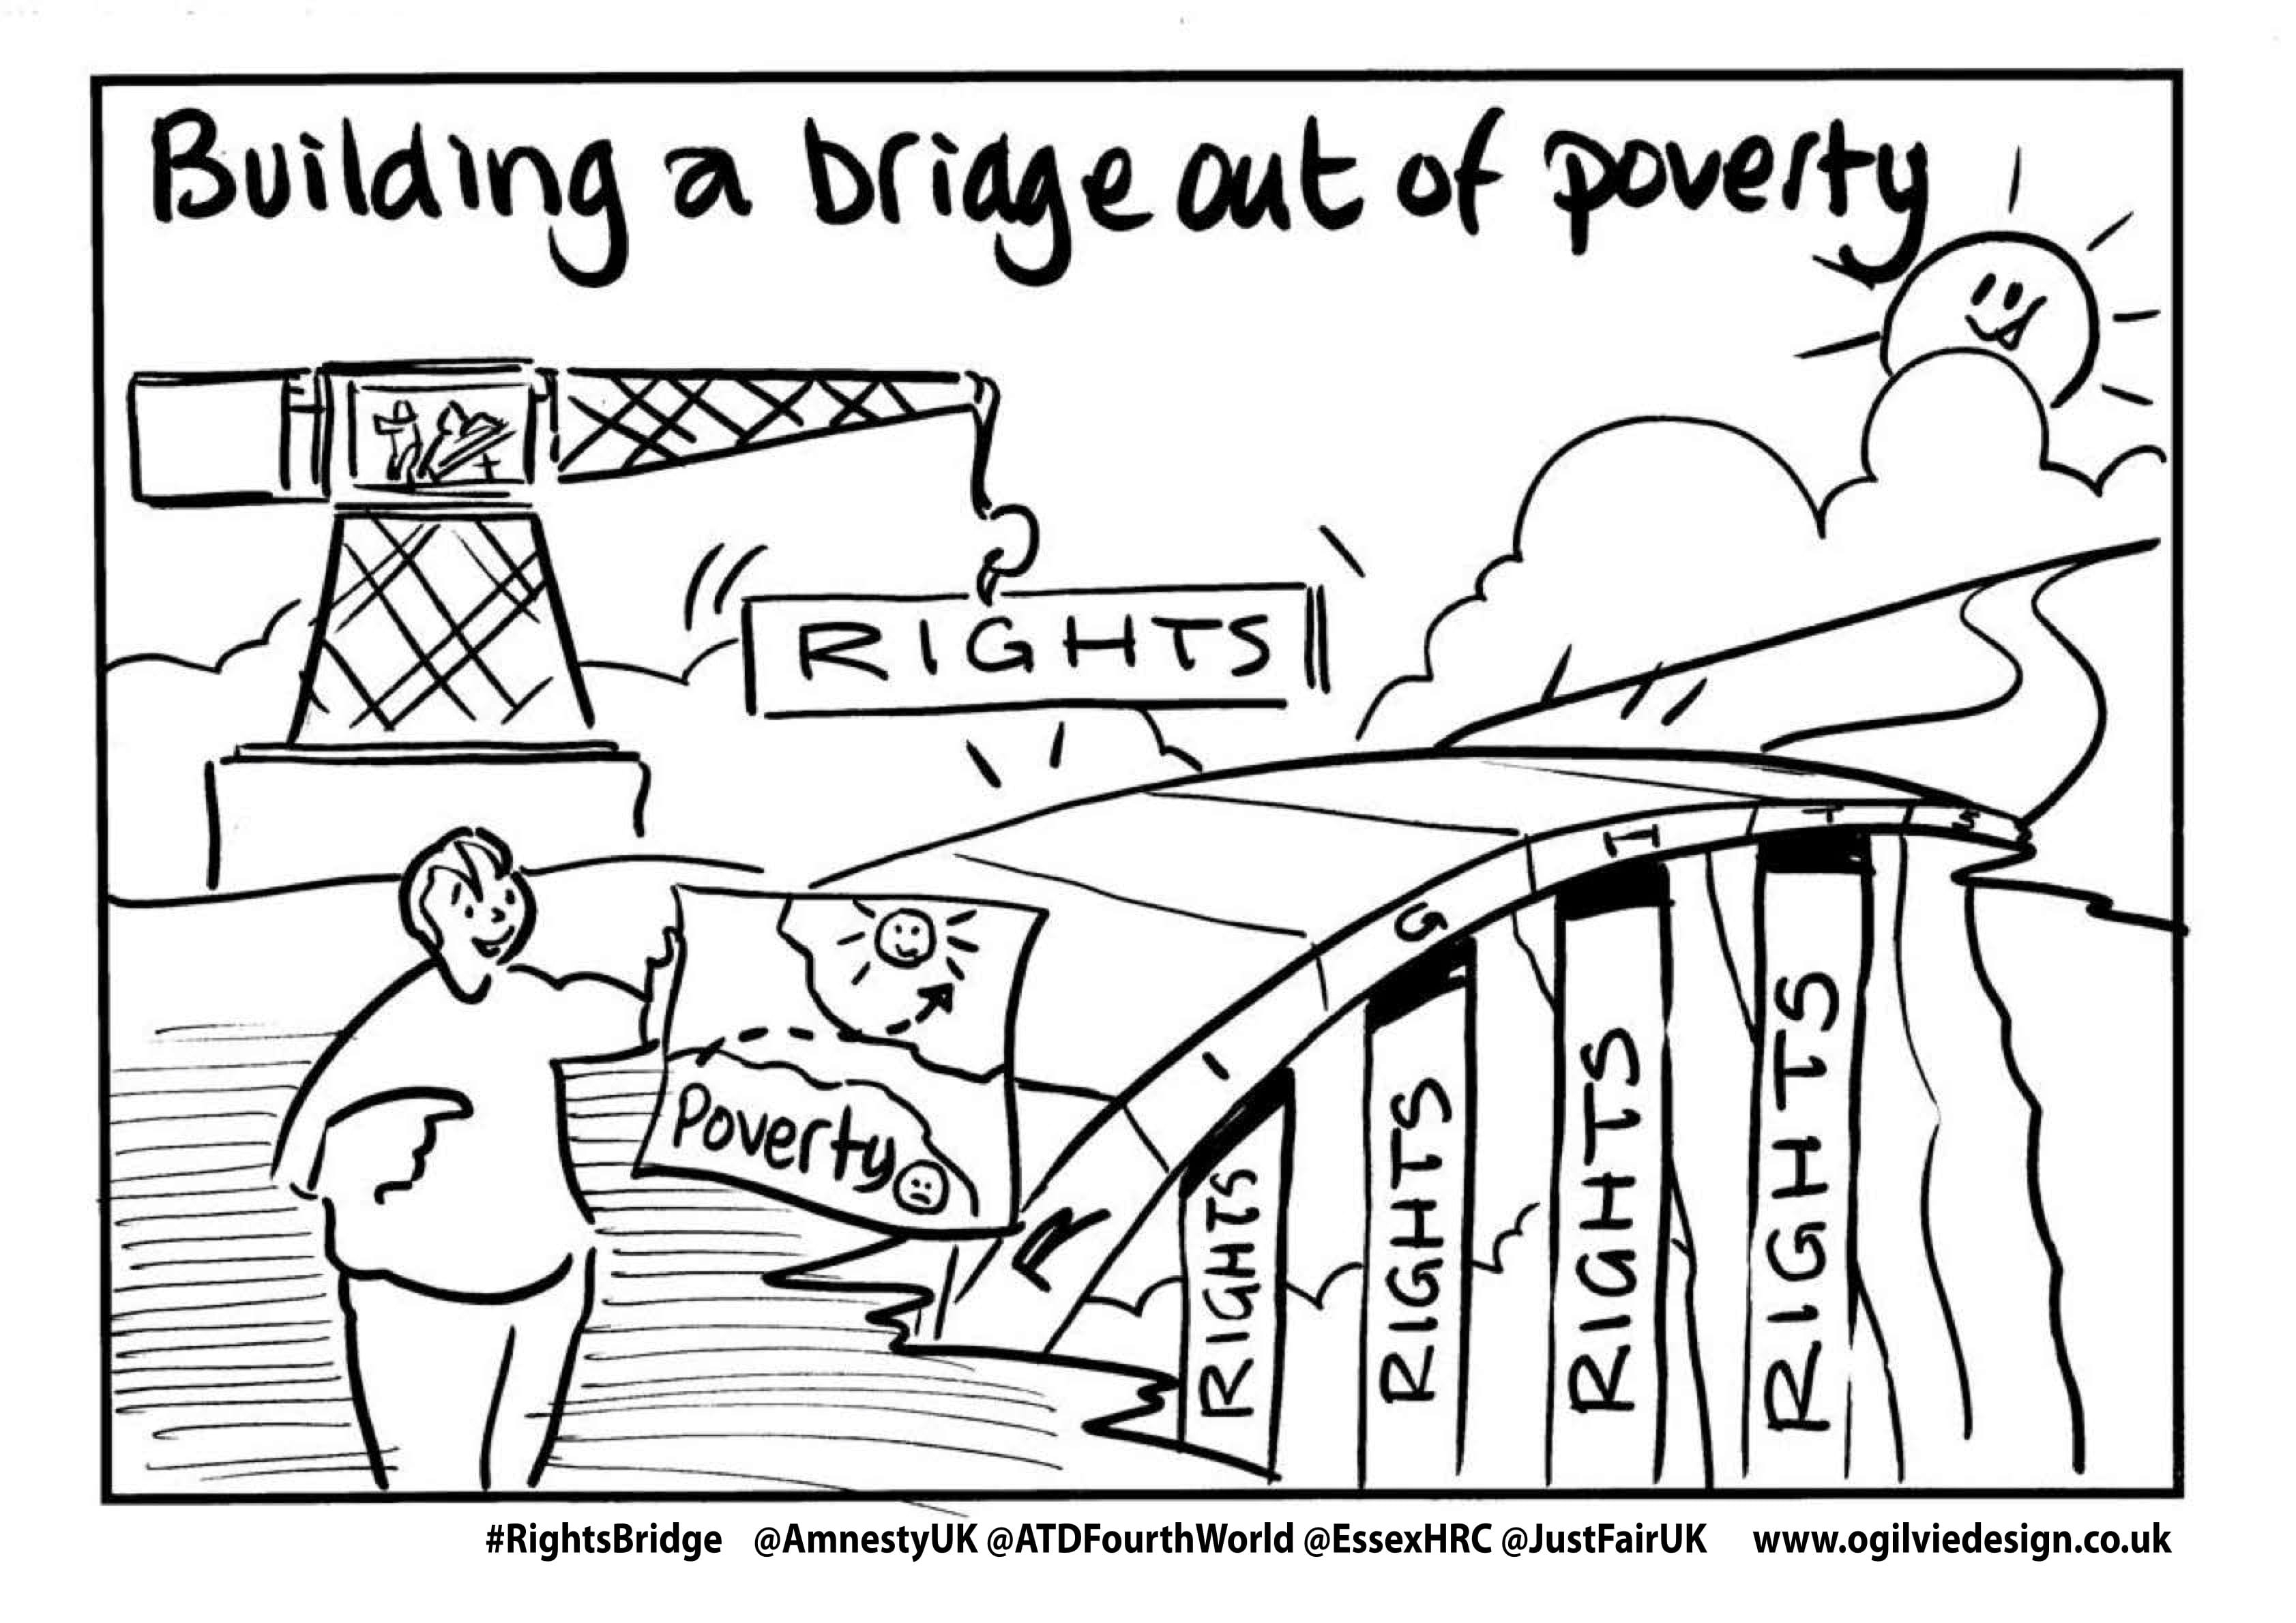 In pictures: How we can build a human rights bridge out of poverty